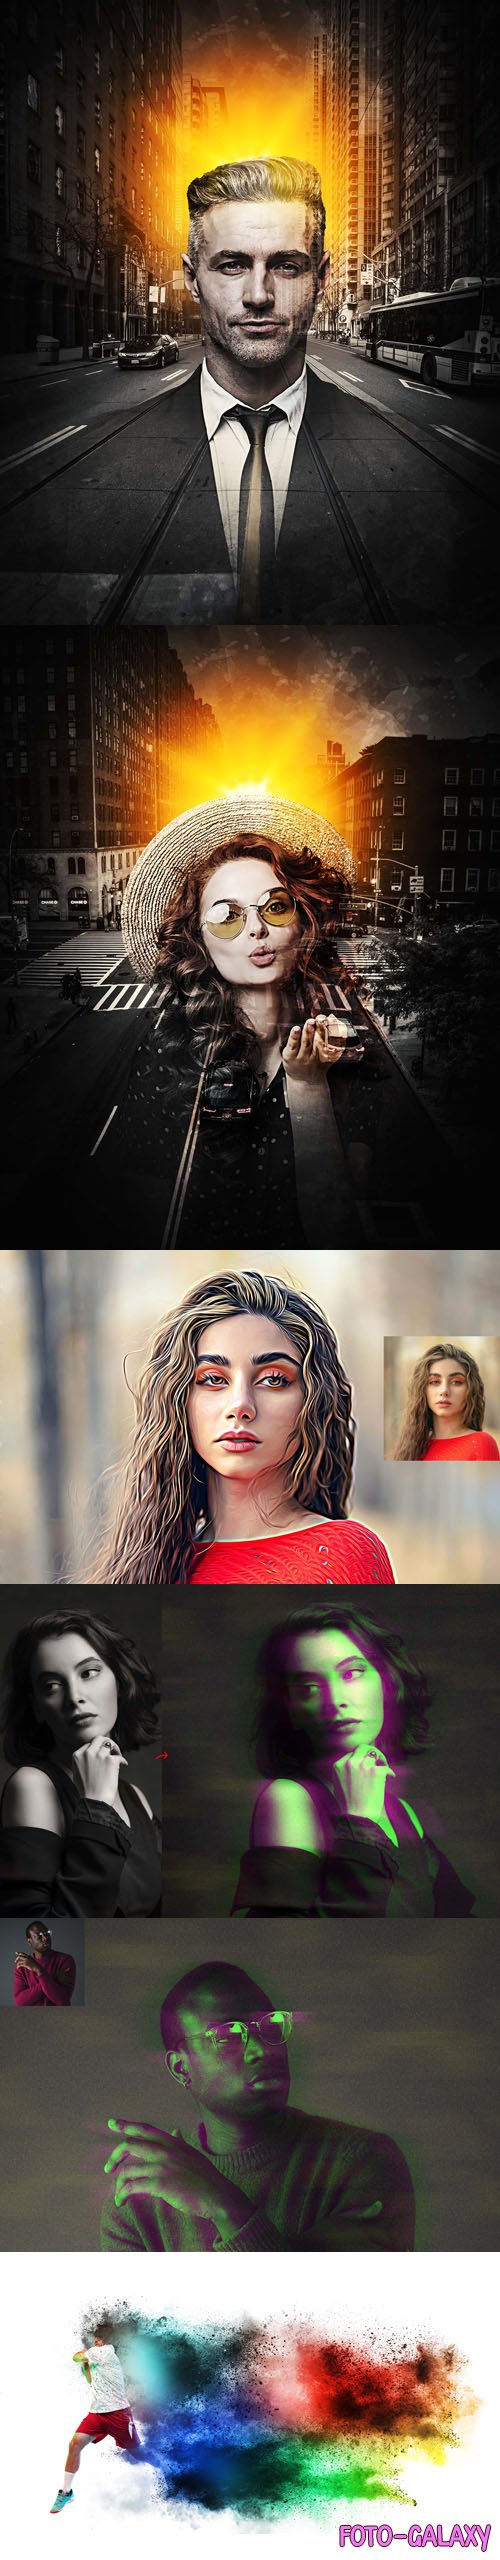 10 Best Photo Effects & Actions for Photoshop [Vol.3]